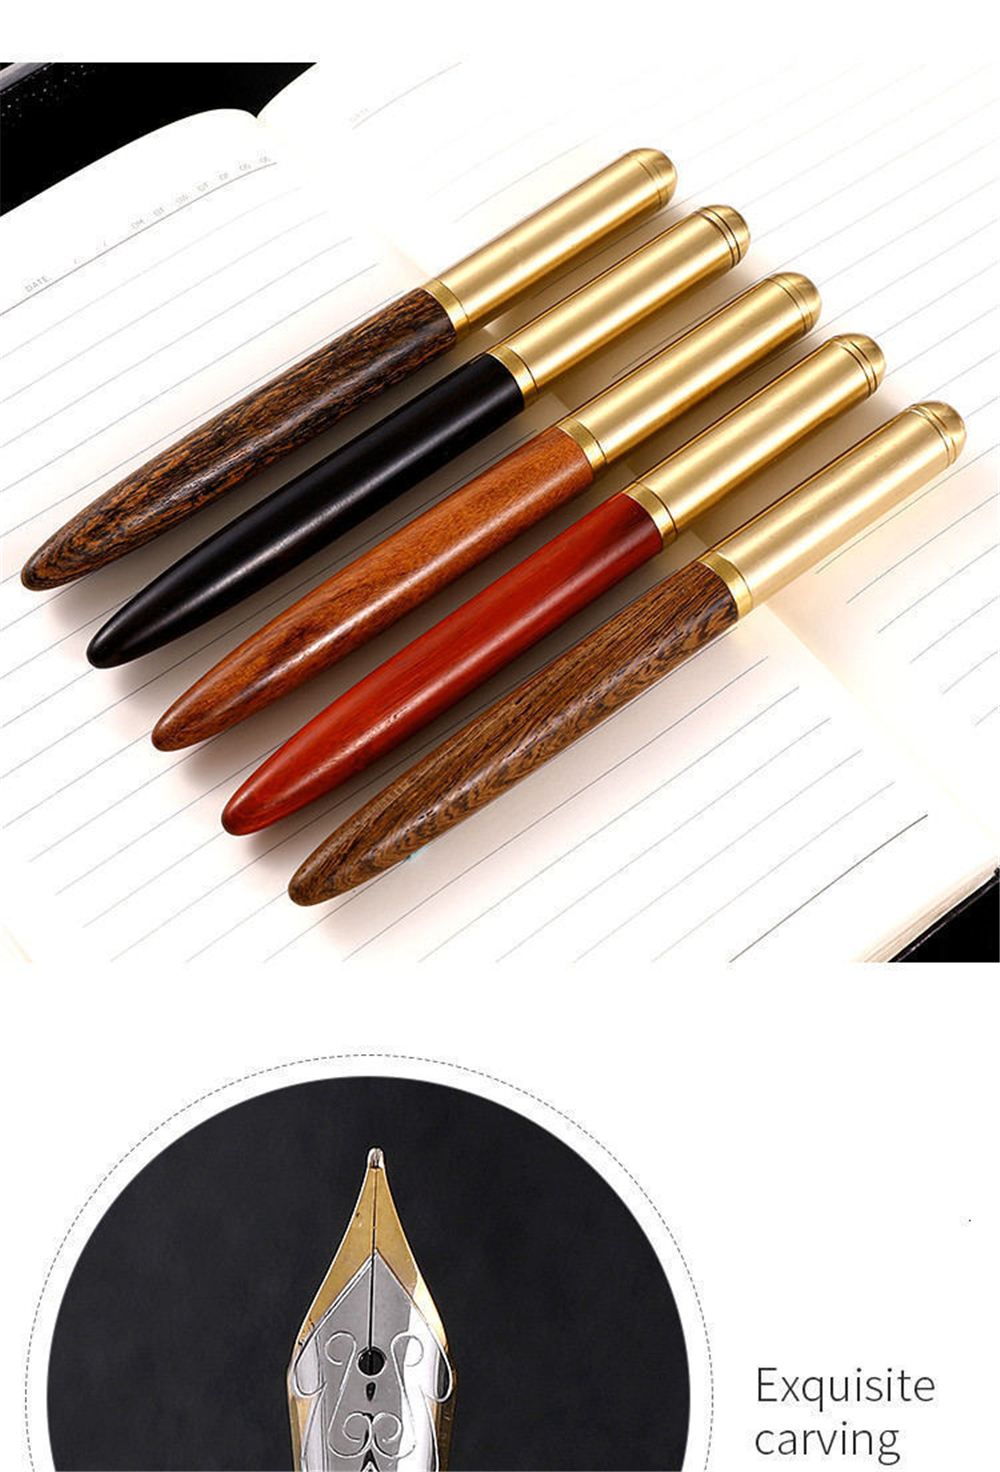 07mm-Nib-Wood-Fountain-Pen-Ink-Classic-Metal-Wood-Pen-Calligraphy-Writing-Business-Gifts-Stationery--1782368-4